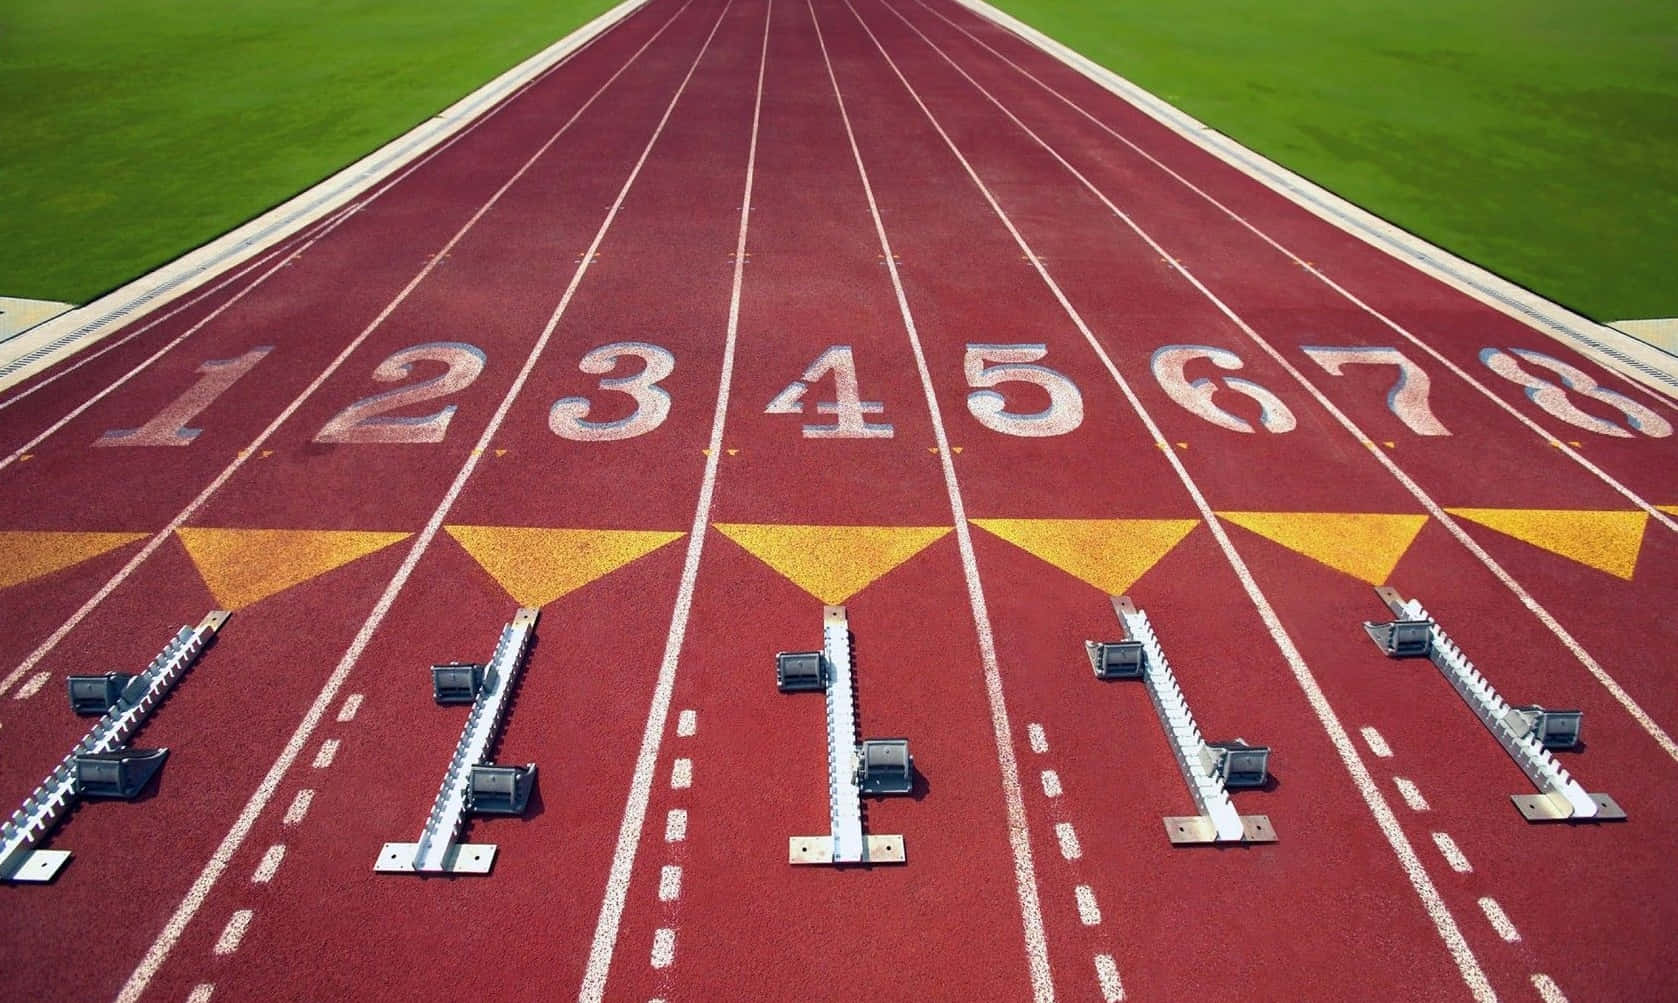 A Running Track With Numbers On It